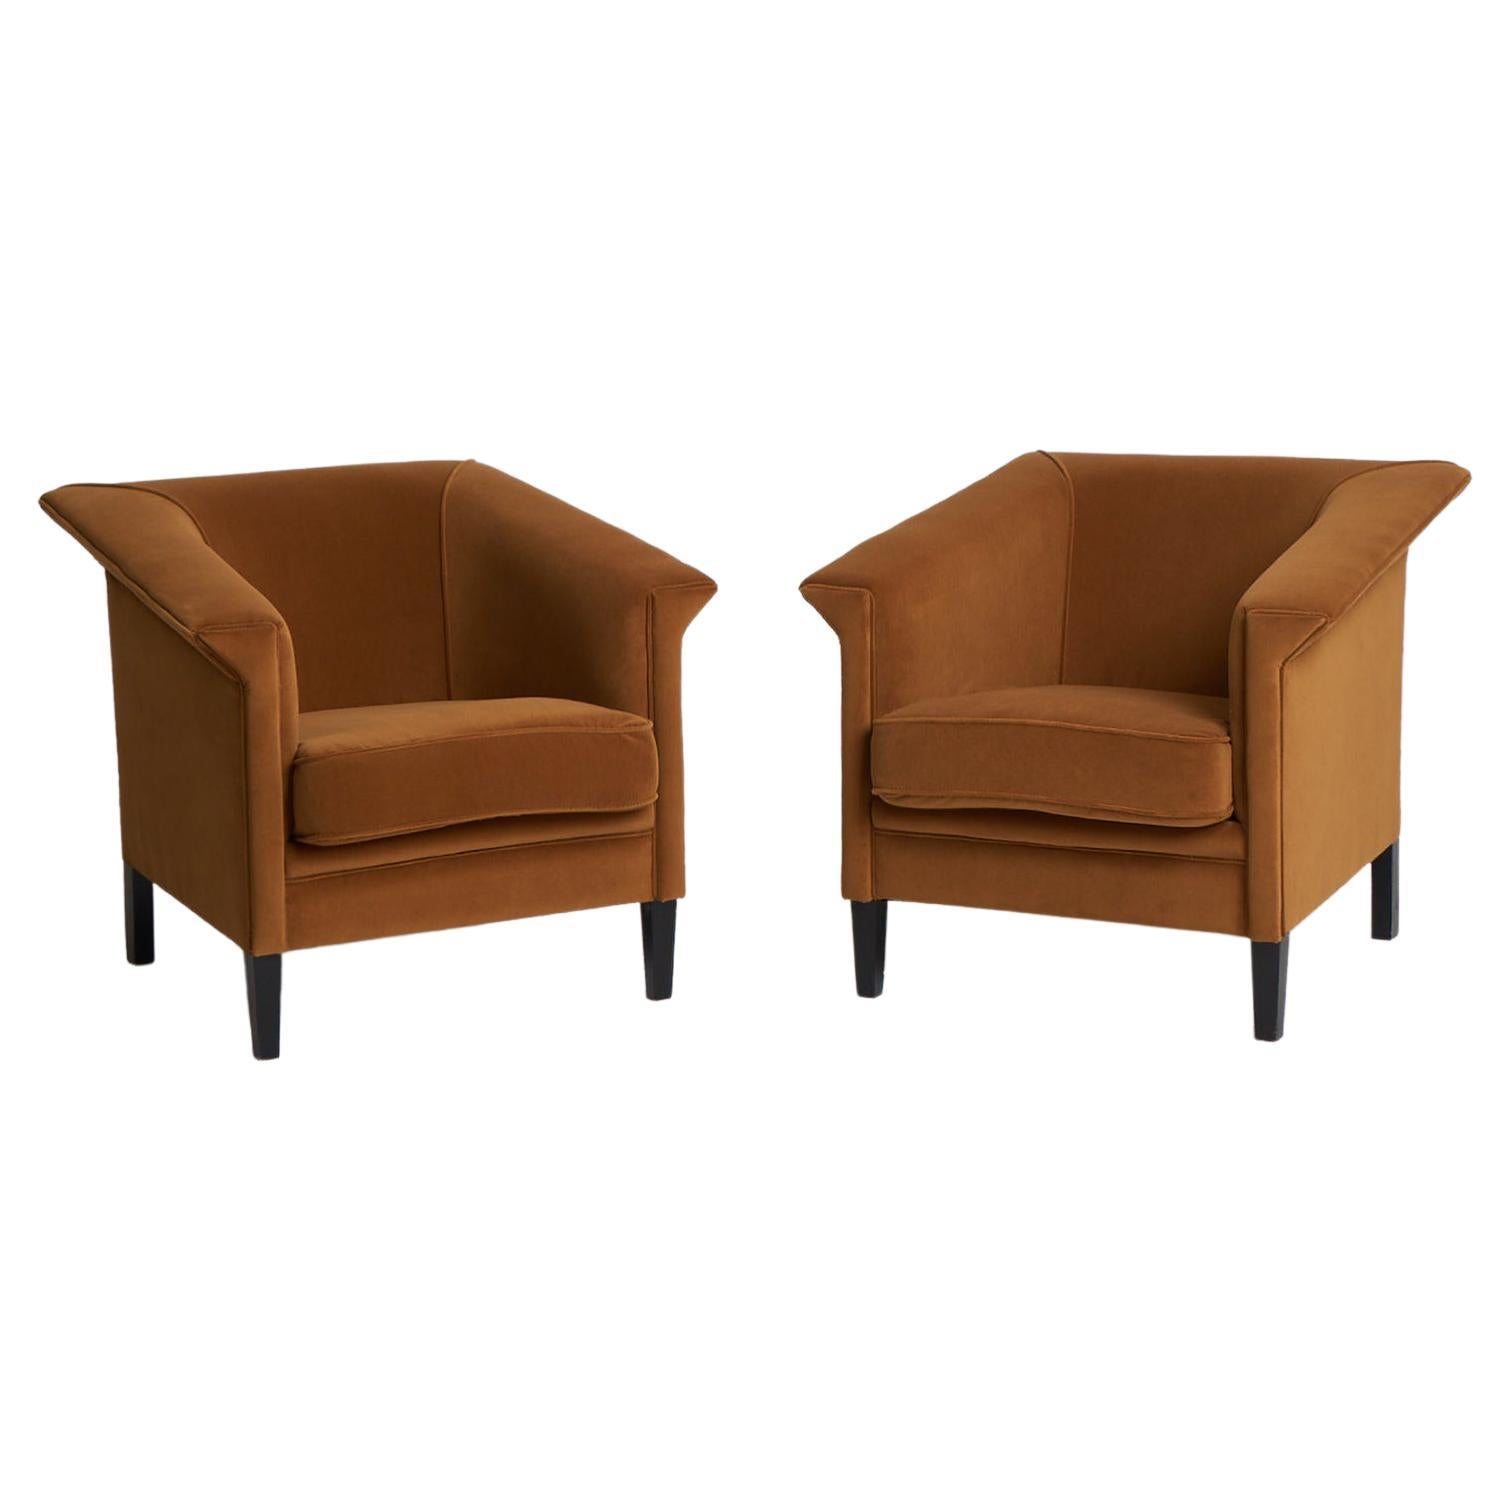 Pair of Mid-Century Club Chairs